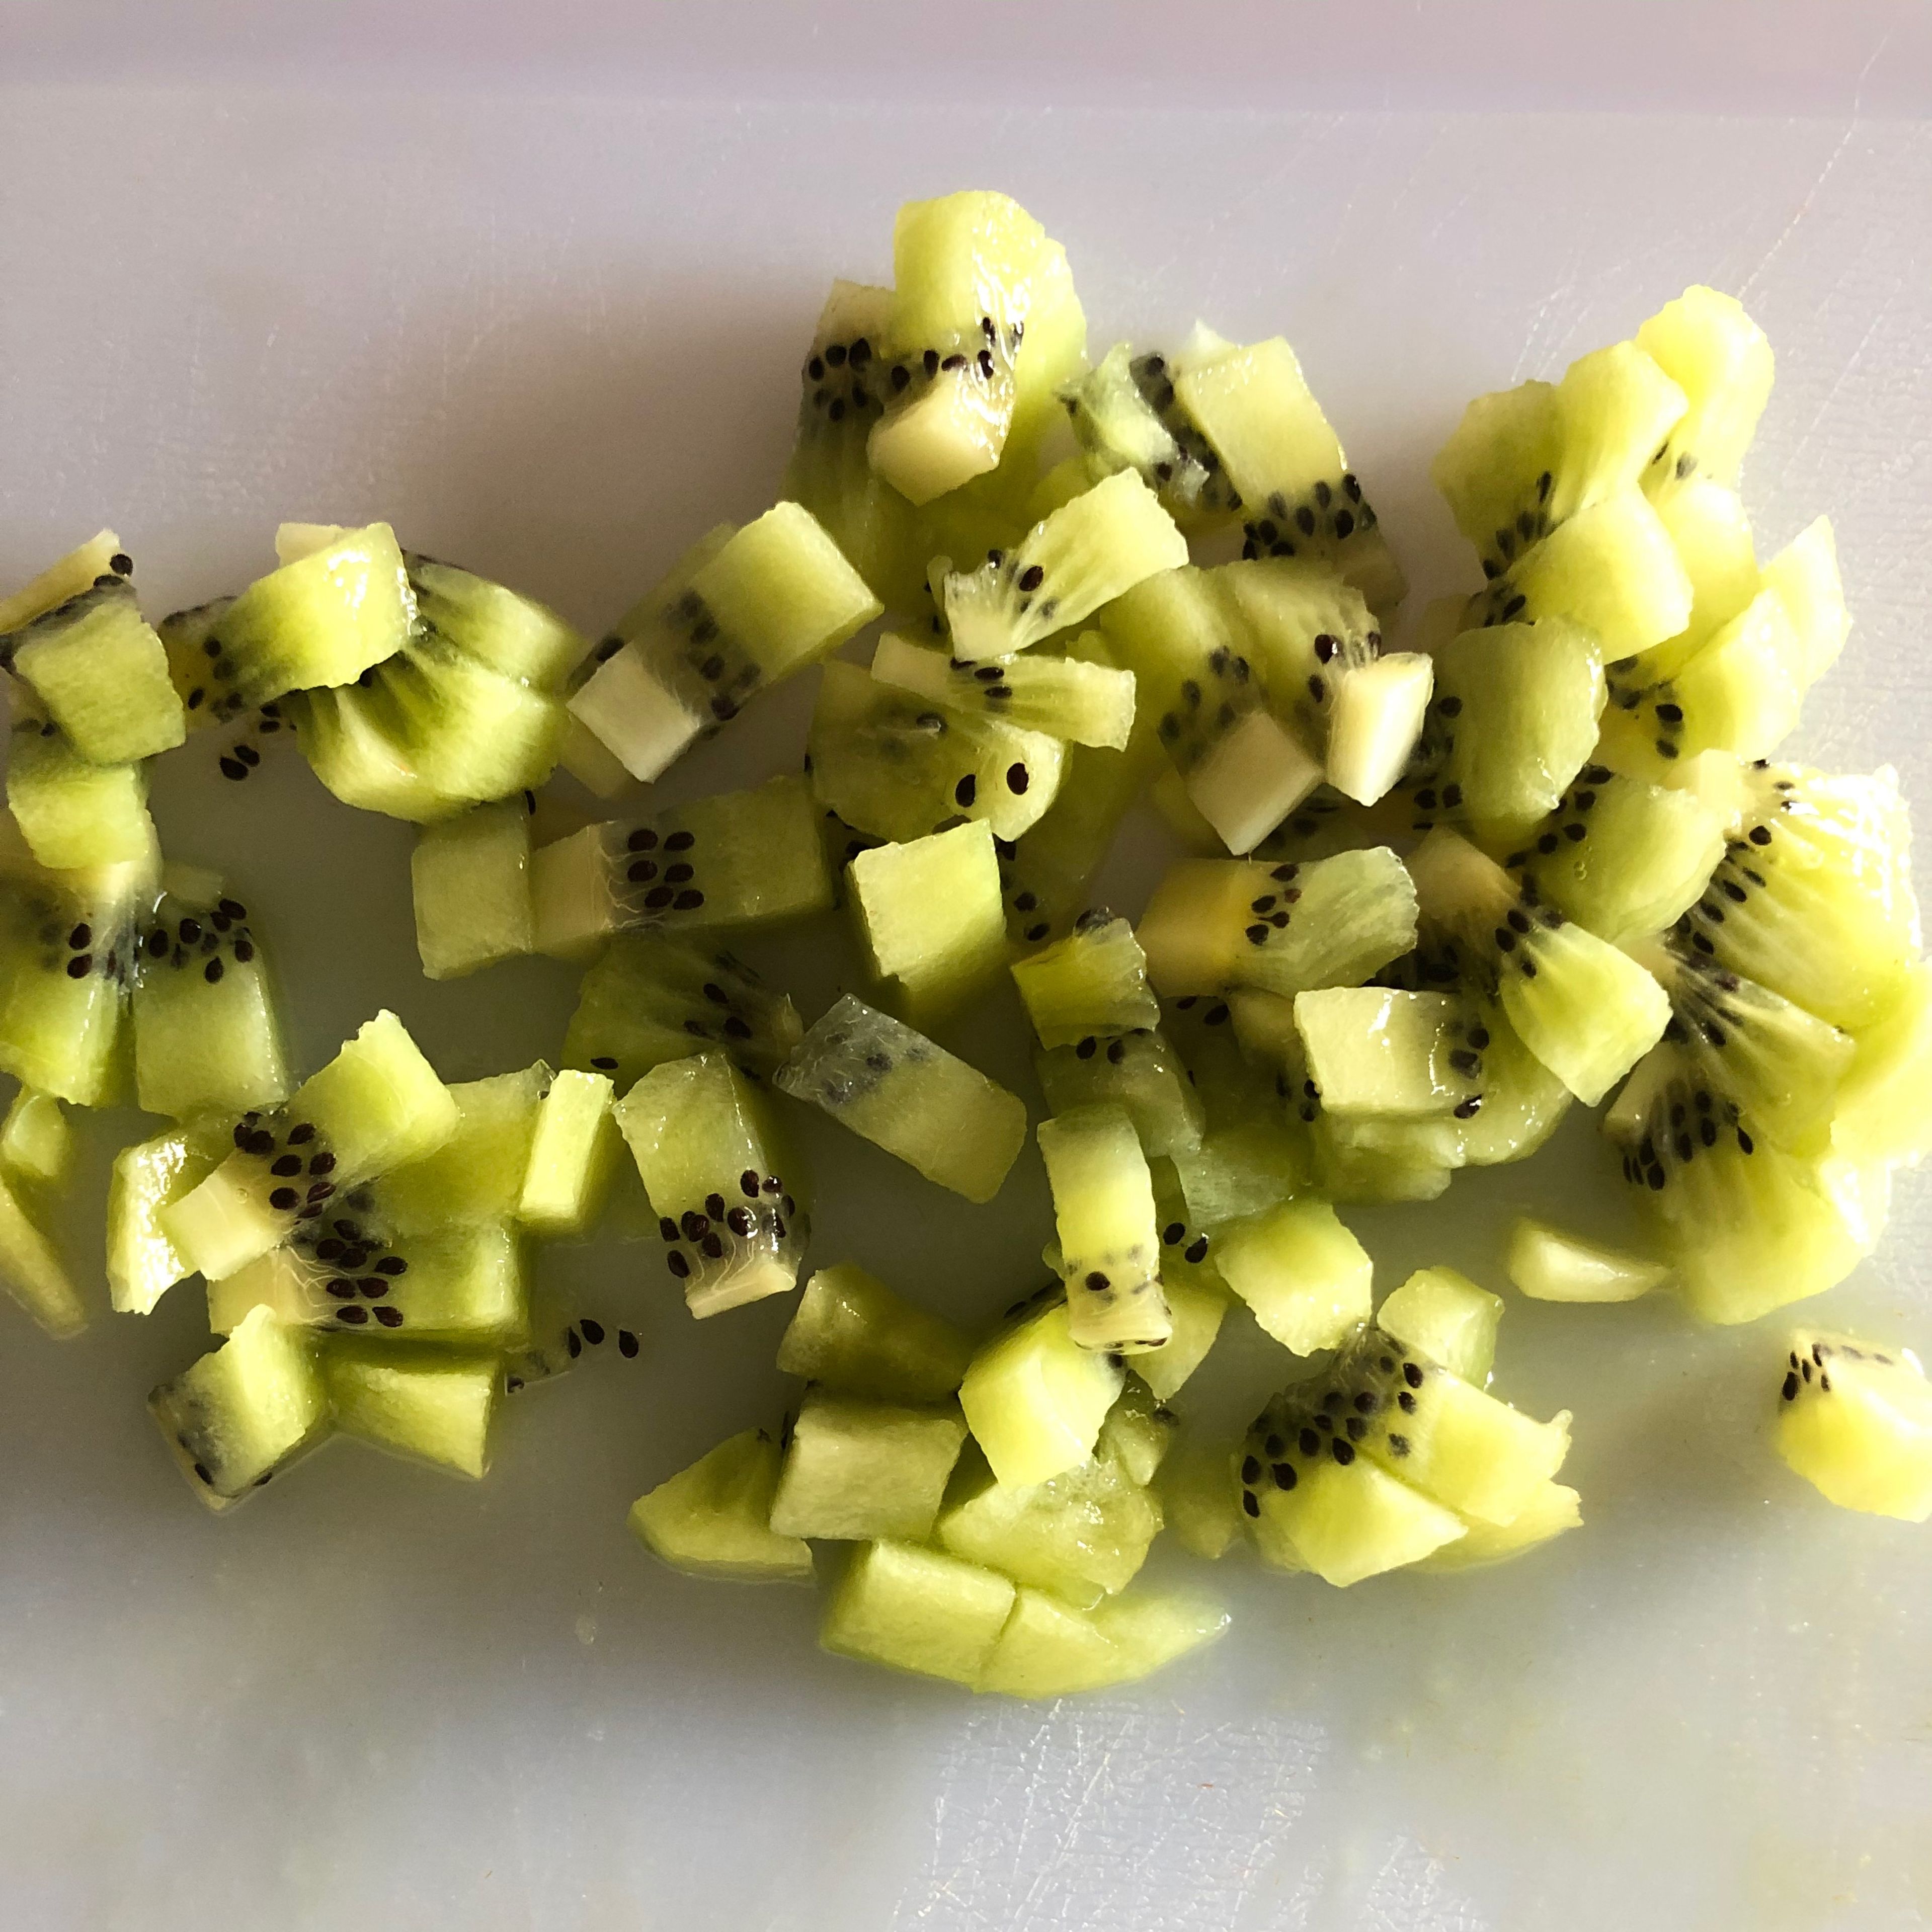 Cut the kiwi in smaller slices (like in the photo)